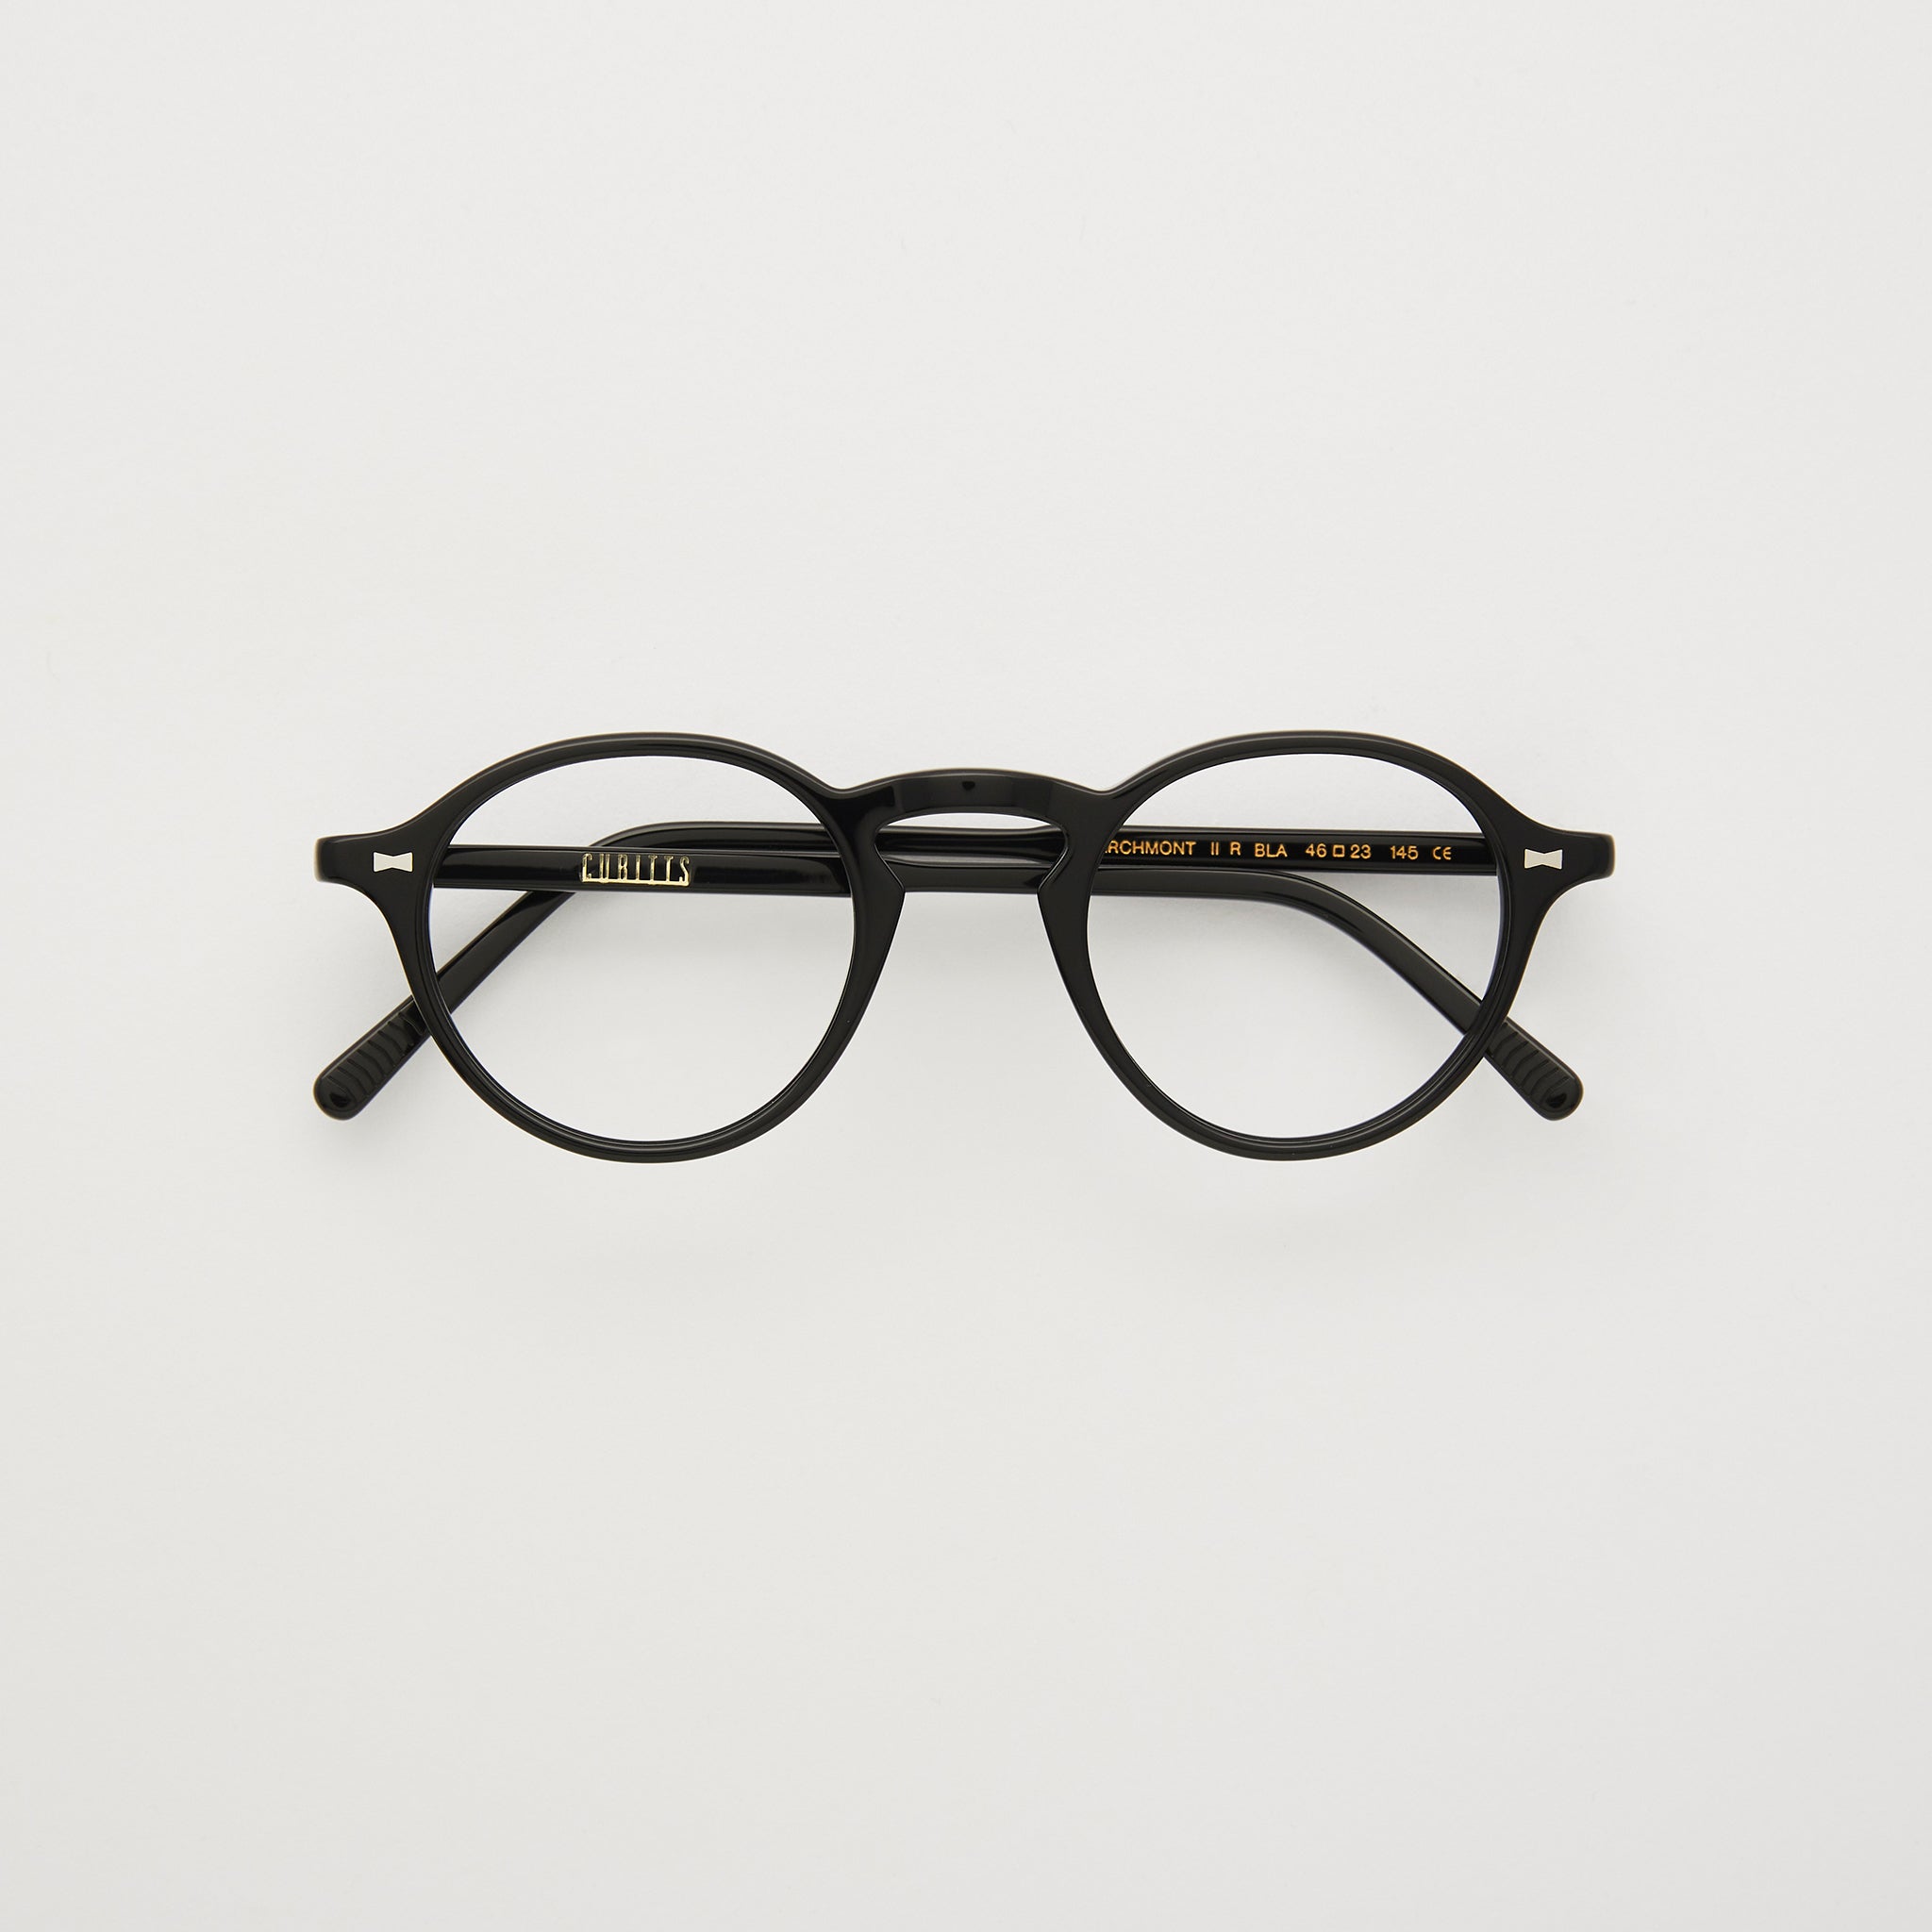 Marchmont: Classic Round Glasses | Cubitts